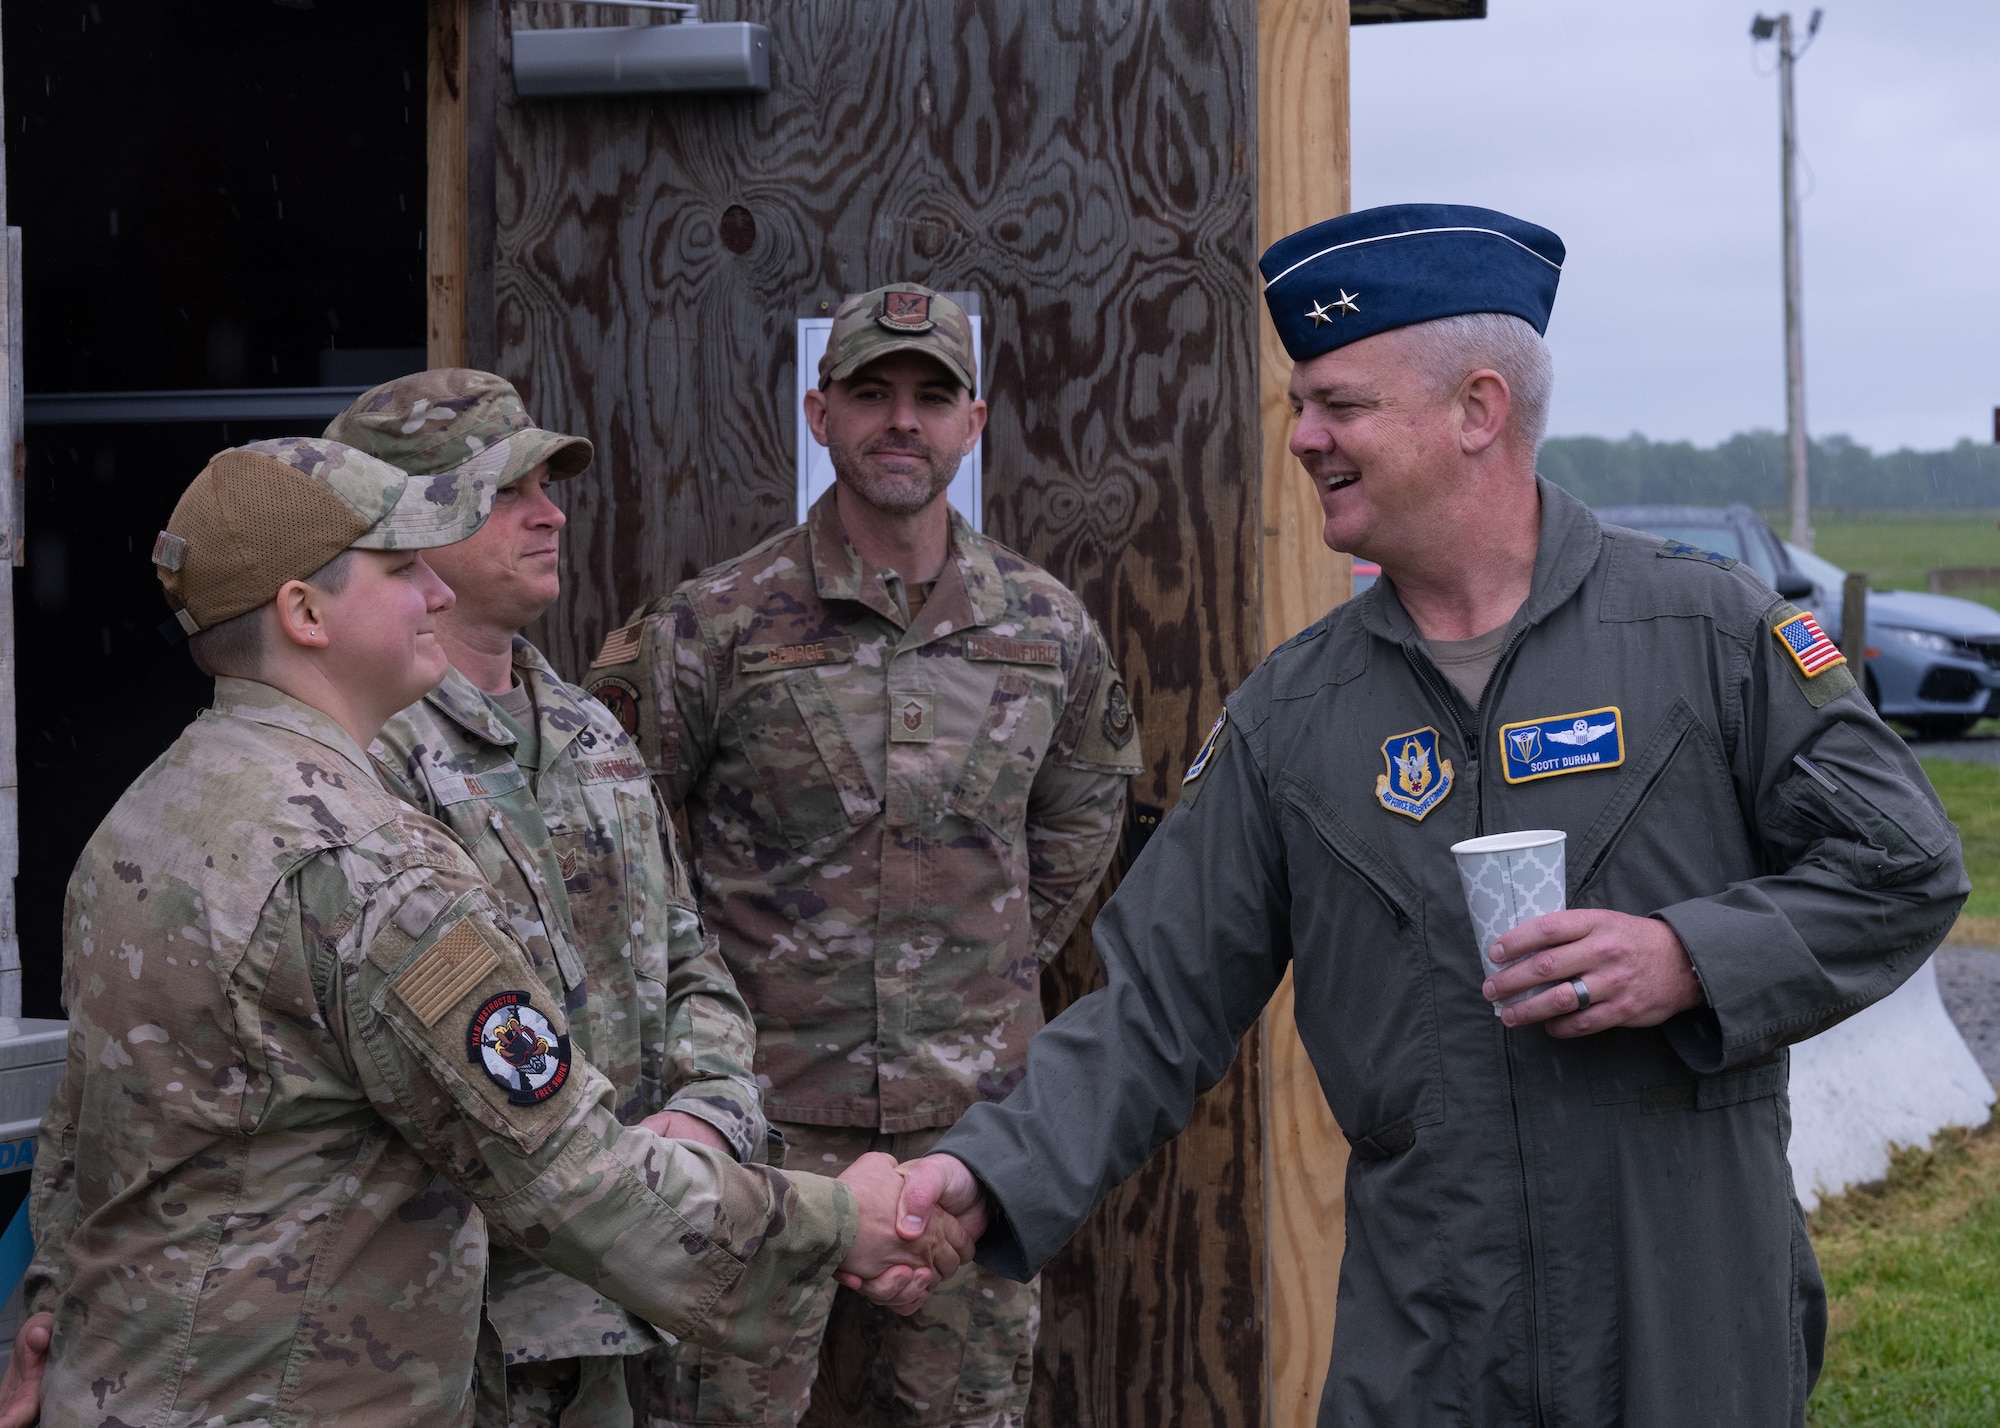 Maj. Gen. D. Scott Durham, 4th Air Force commander, meets (from left) Staff Sgt. Karleigh Marin and Tech Sgt. Jason Bell, Tactics and Leadership Nexus cadre and Master Sgt. Forrest George, TALN course chief, May 4, 2024, on Dover Air Force Base, Delaware. TALN is a two-day scenario-based course designed to increase readiness and hone tactical and leadership skills. (U.S. Air Force photo by Senior Airman John Rossi)